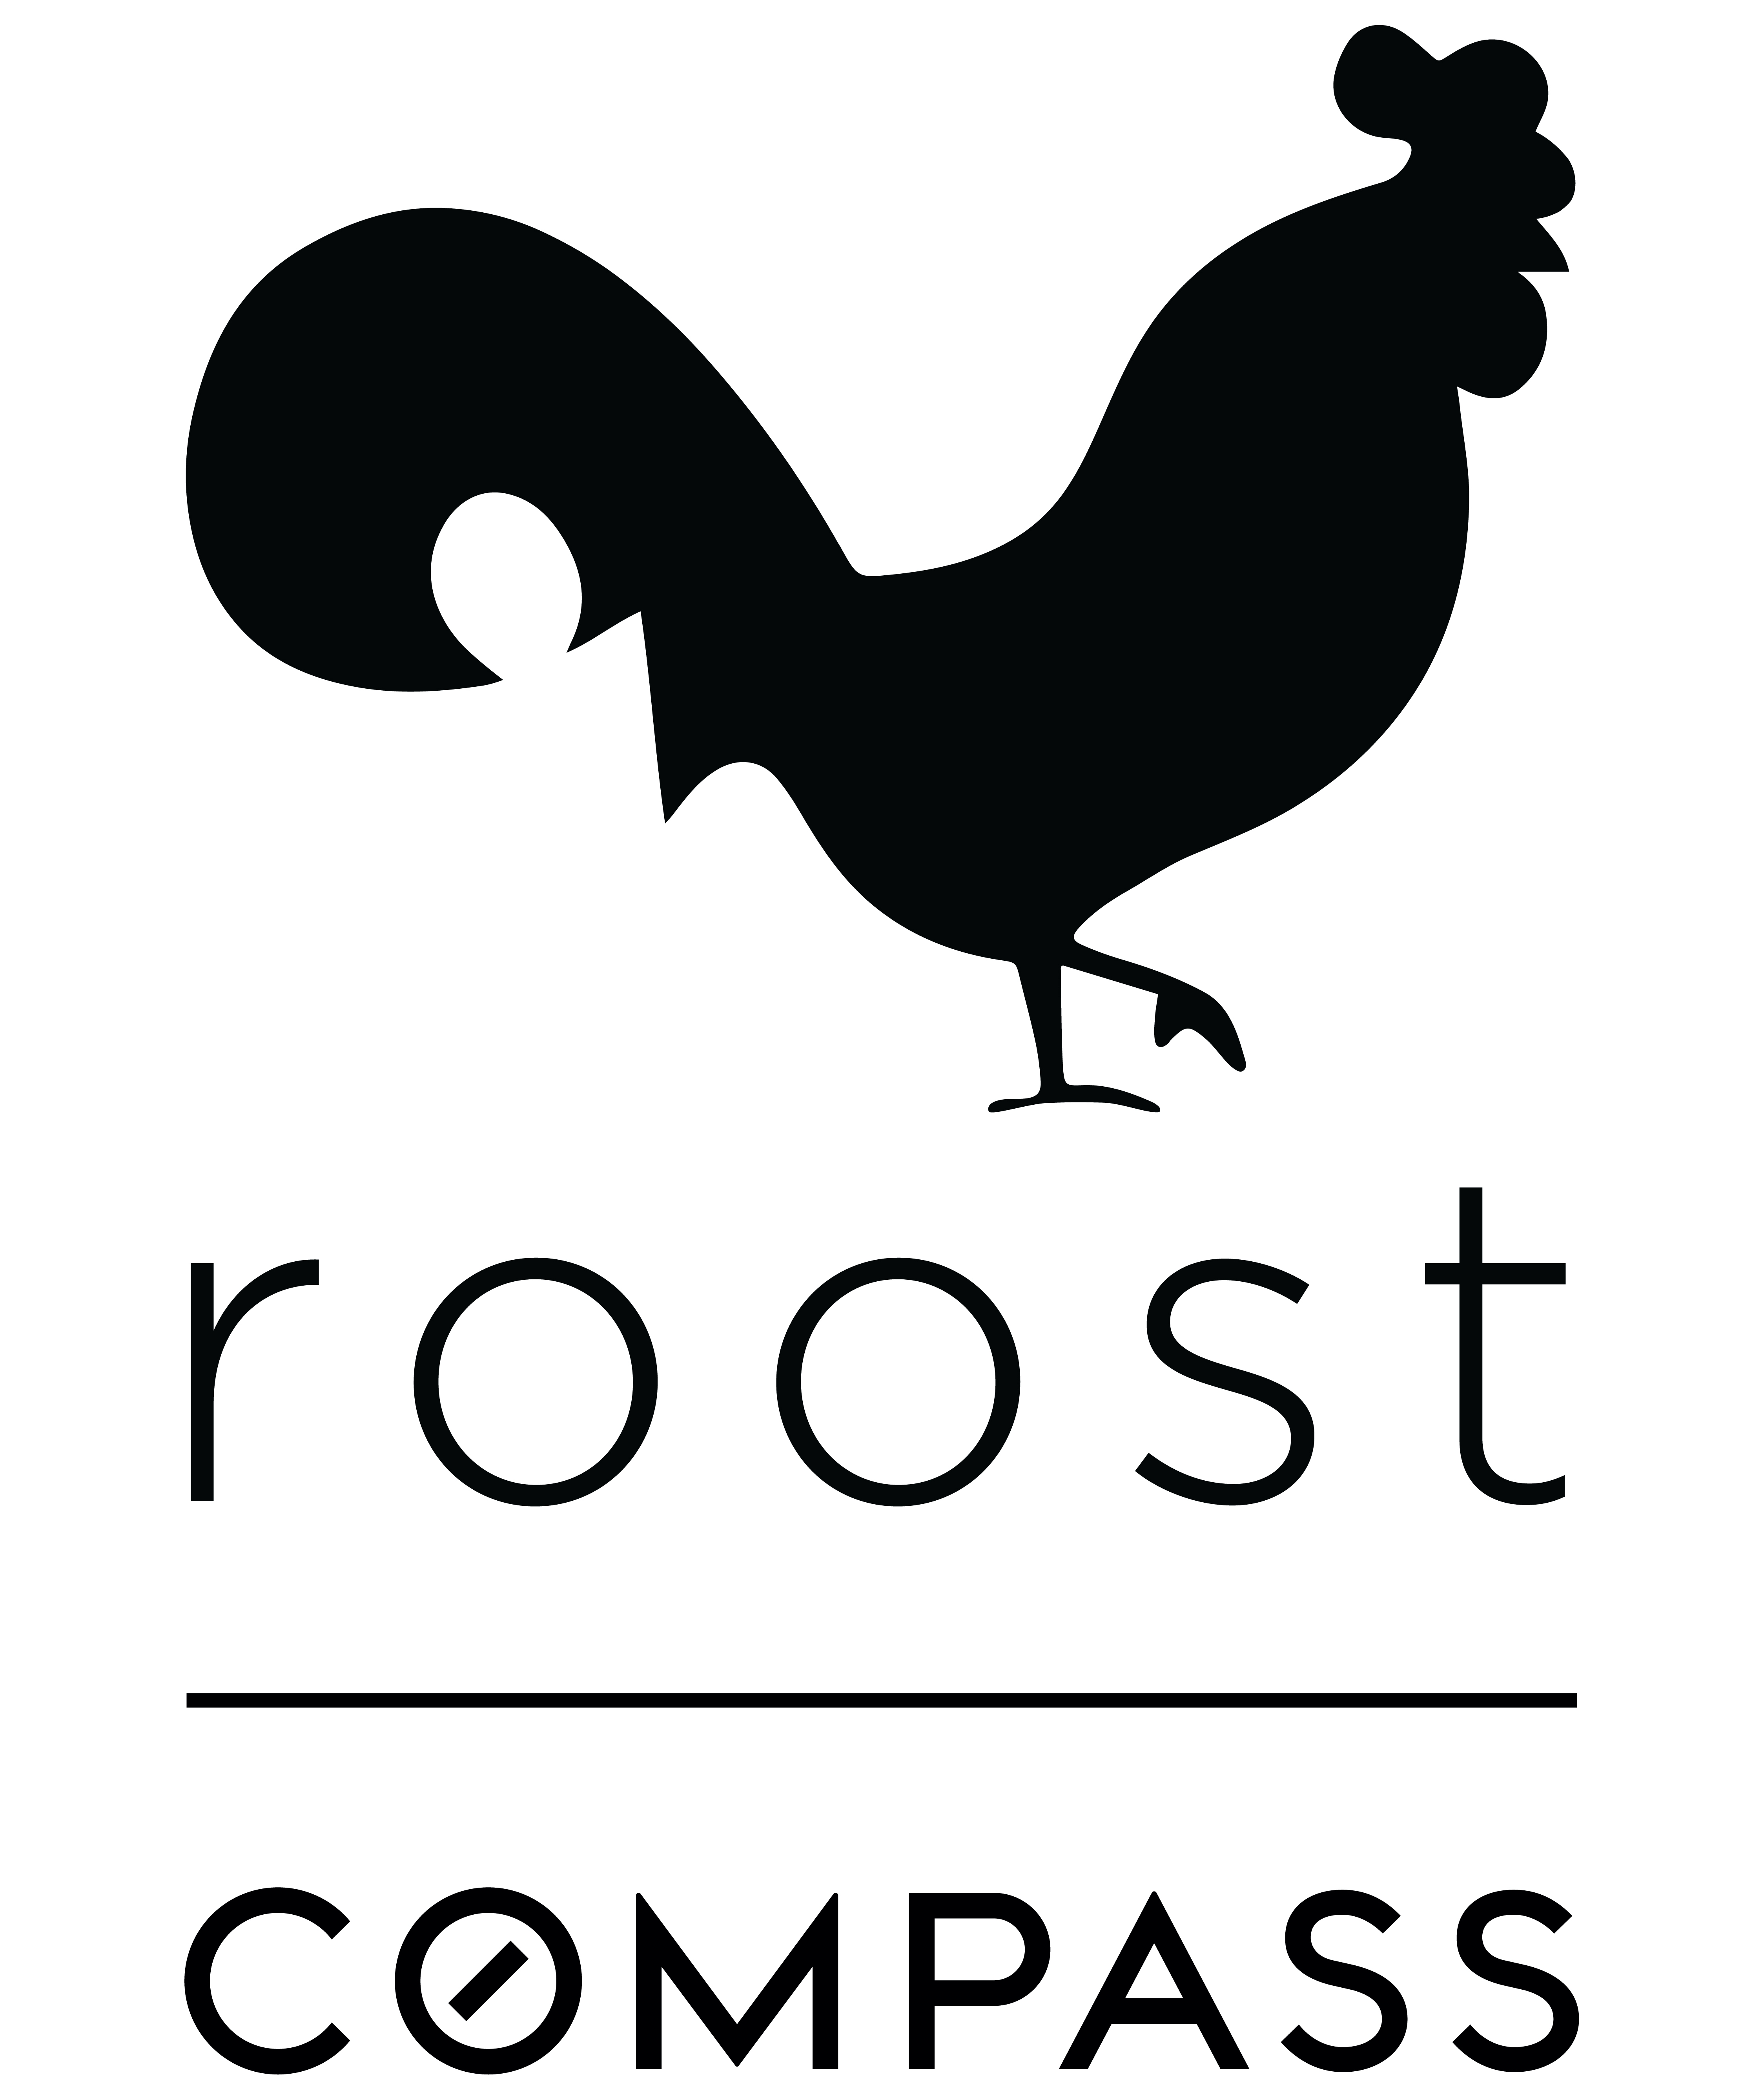 Roost Real Estate + Compass